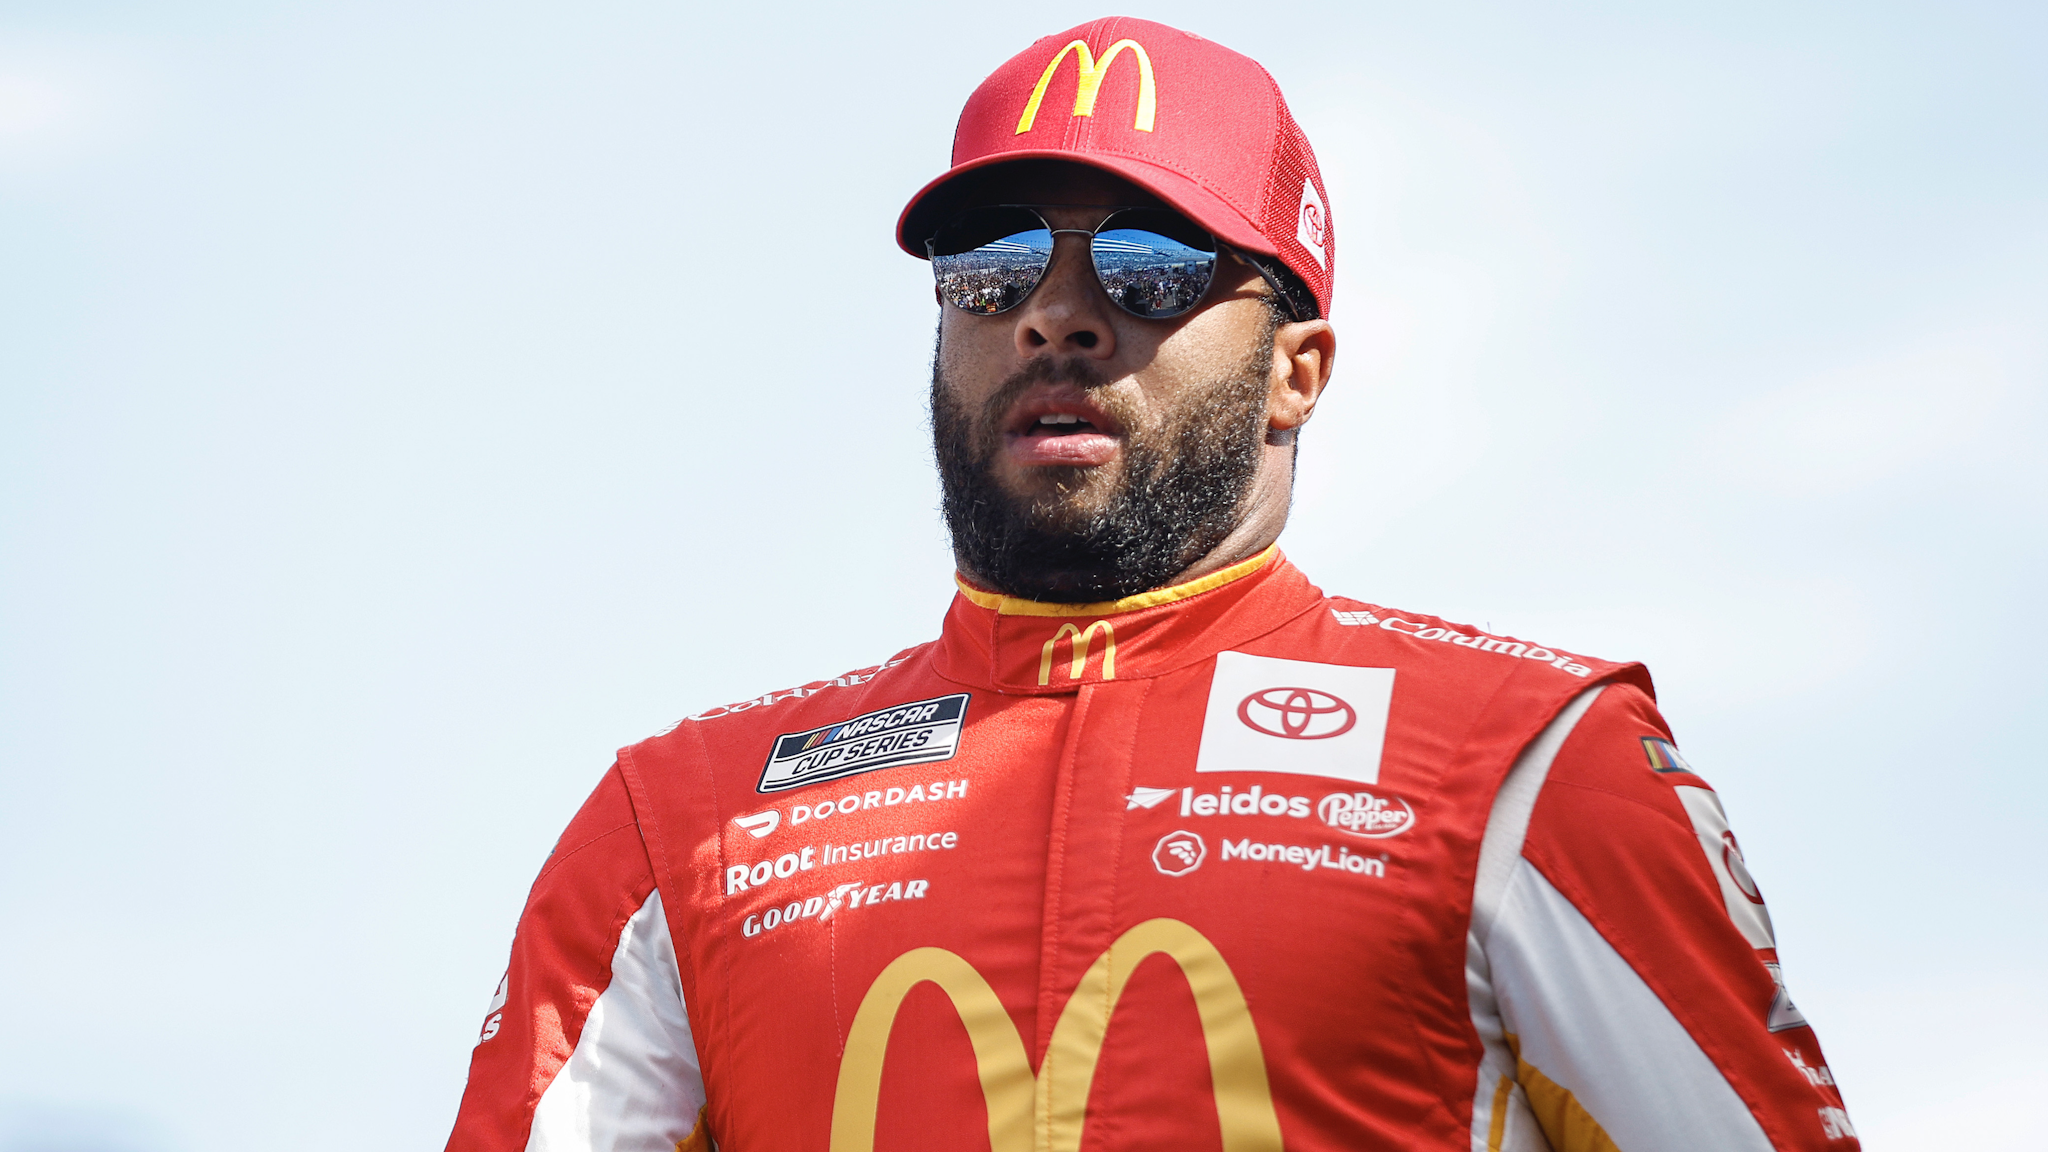 LAS VEGAS, NEVADA - OCTOBER 16: Bubba Wallace, driver of the #45 McDonald's Toyota, walks onstage during driver intros prior to the NASCAR Cup Series South Point 400 at Las Vegas Motor Speedway on October 16, 2022 in Las Vegas, Nevada.